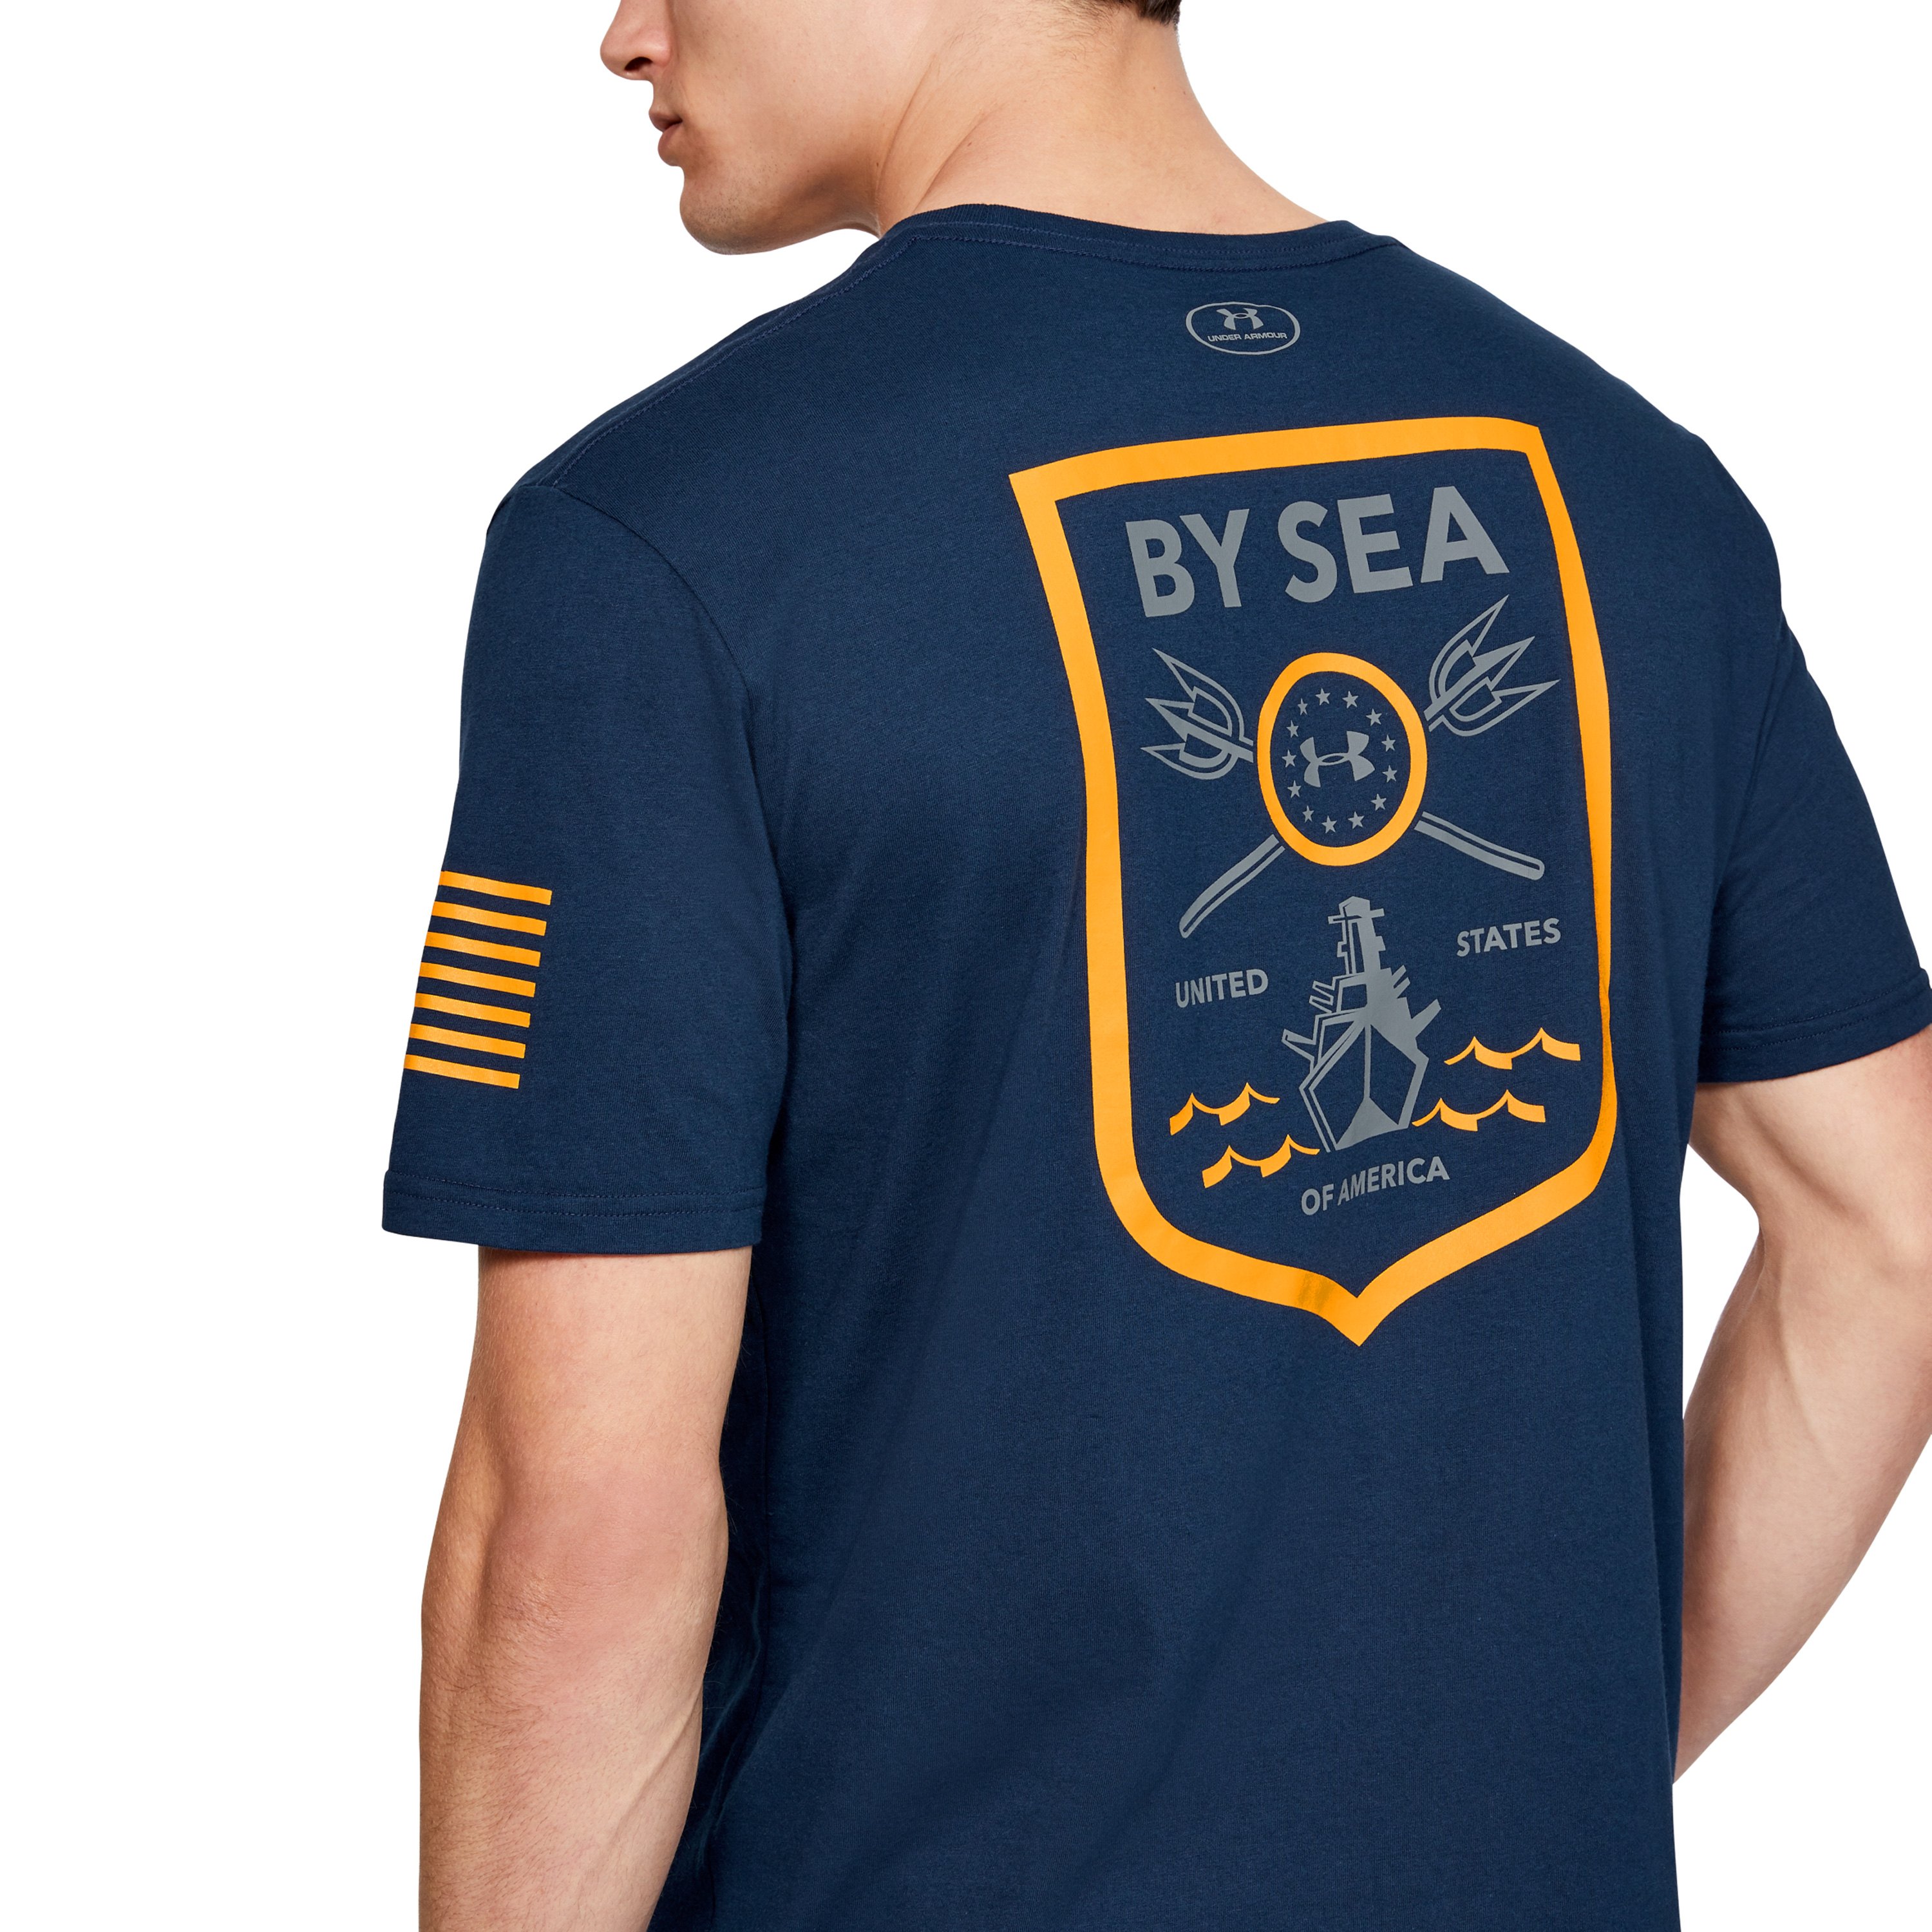 under armour by sea t shirt